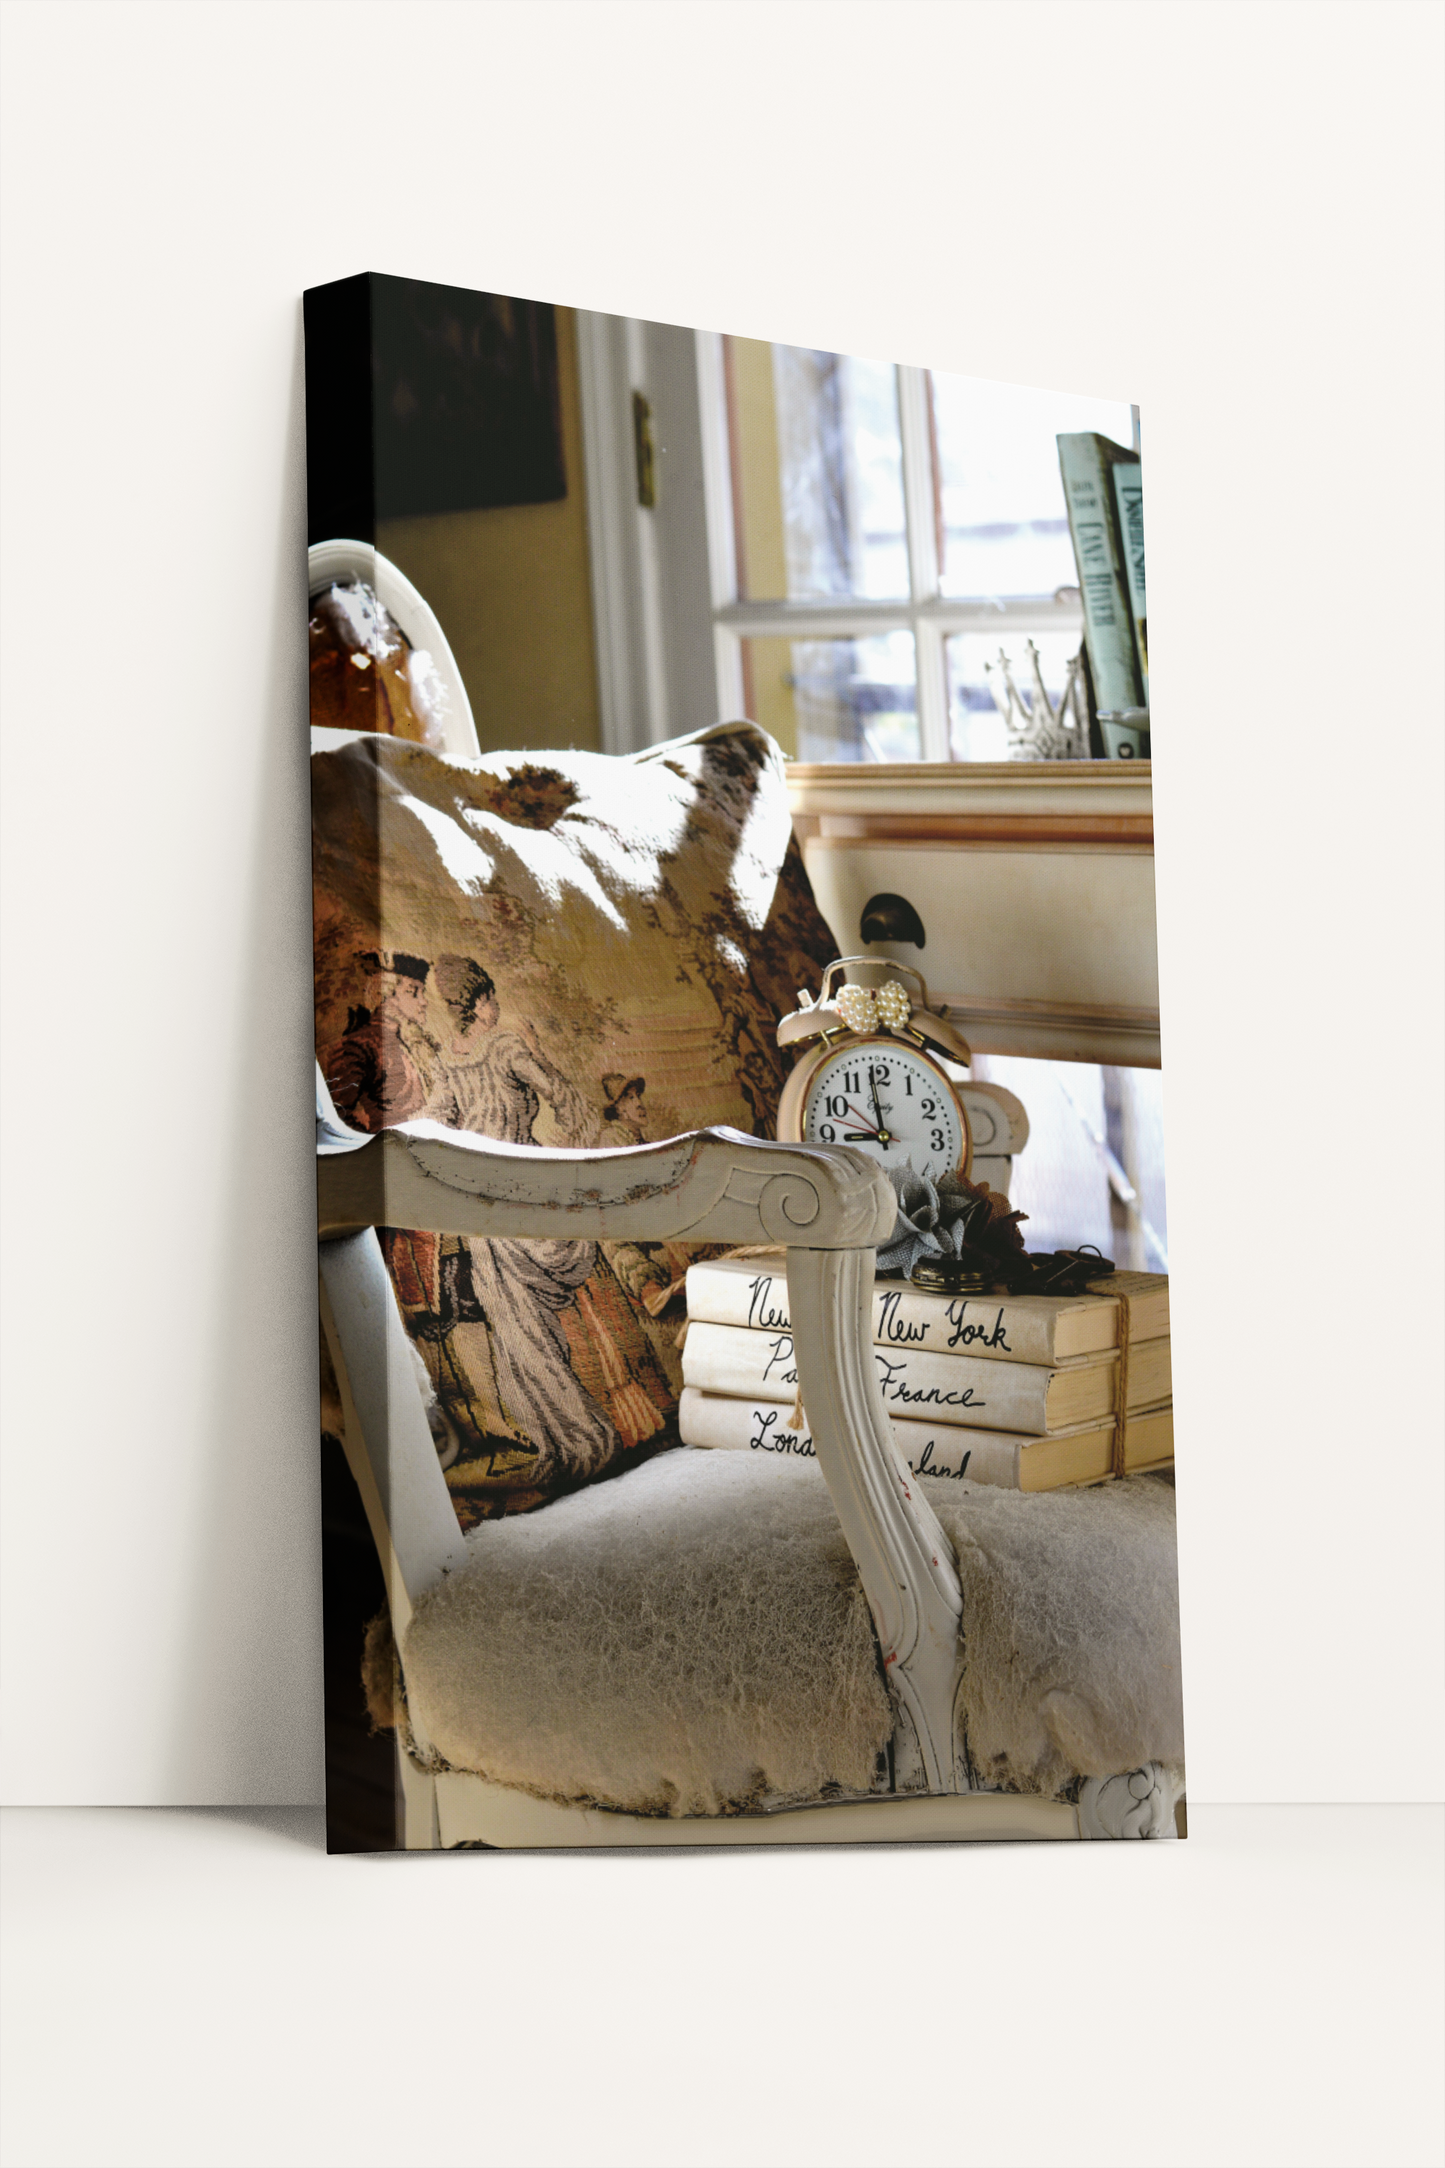 Antique chair, books, and clock in cottage home photography canvas print